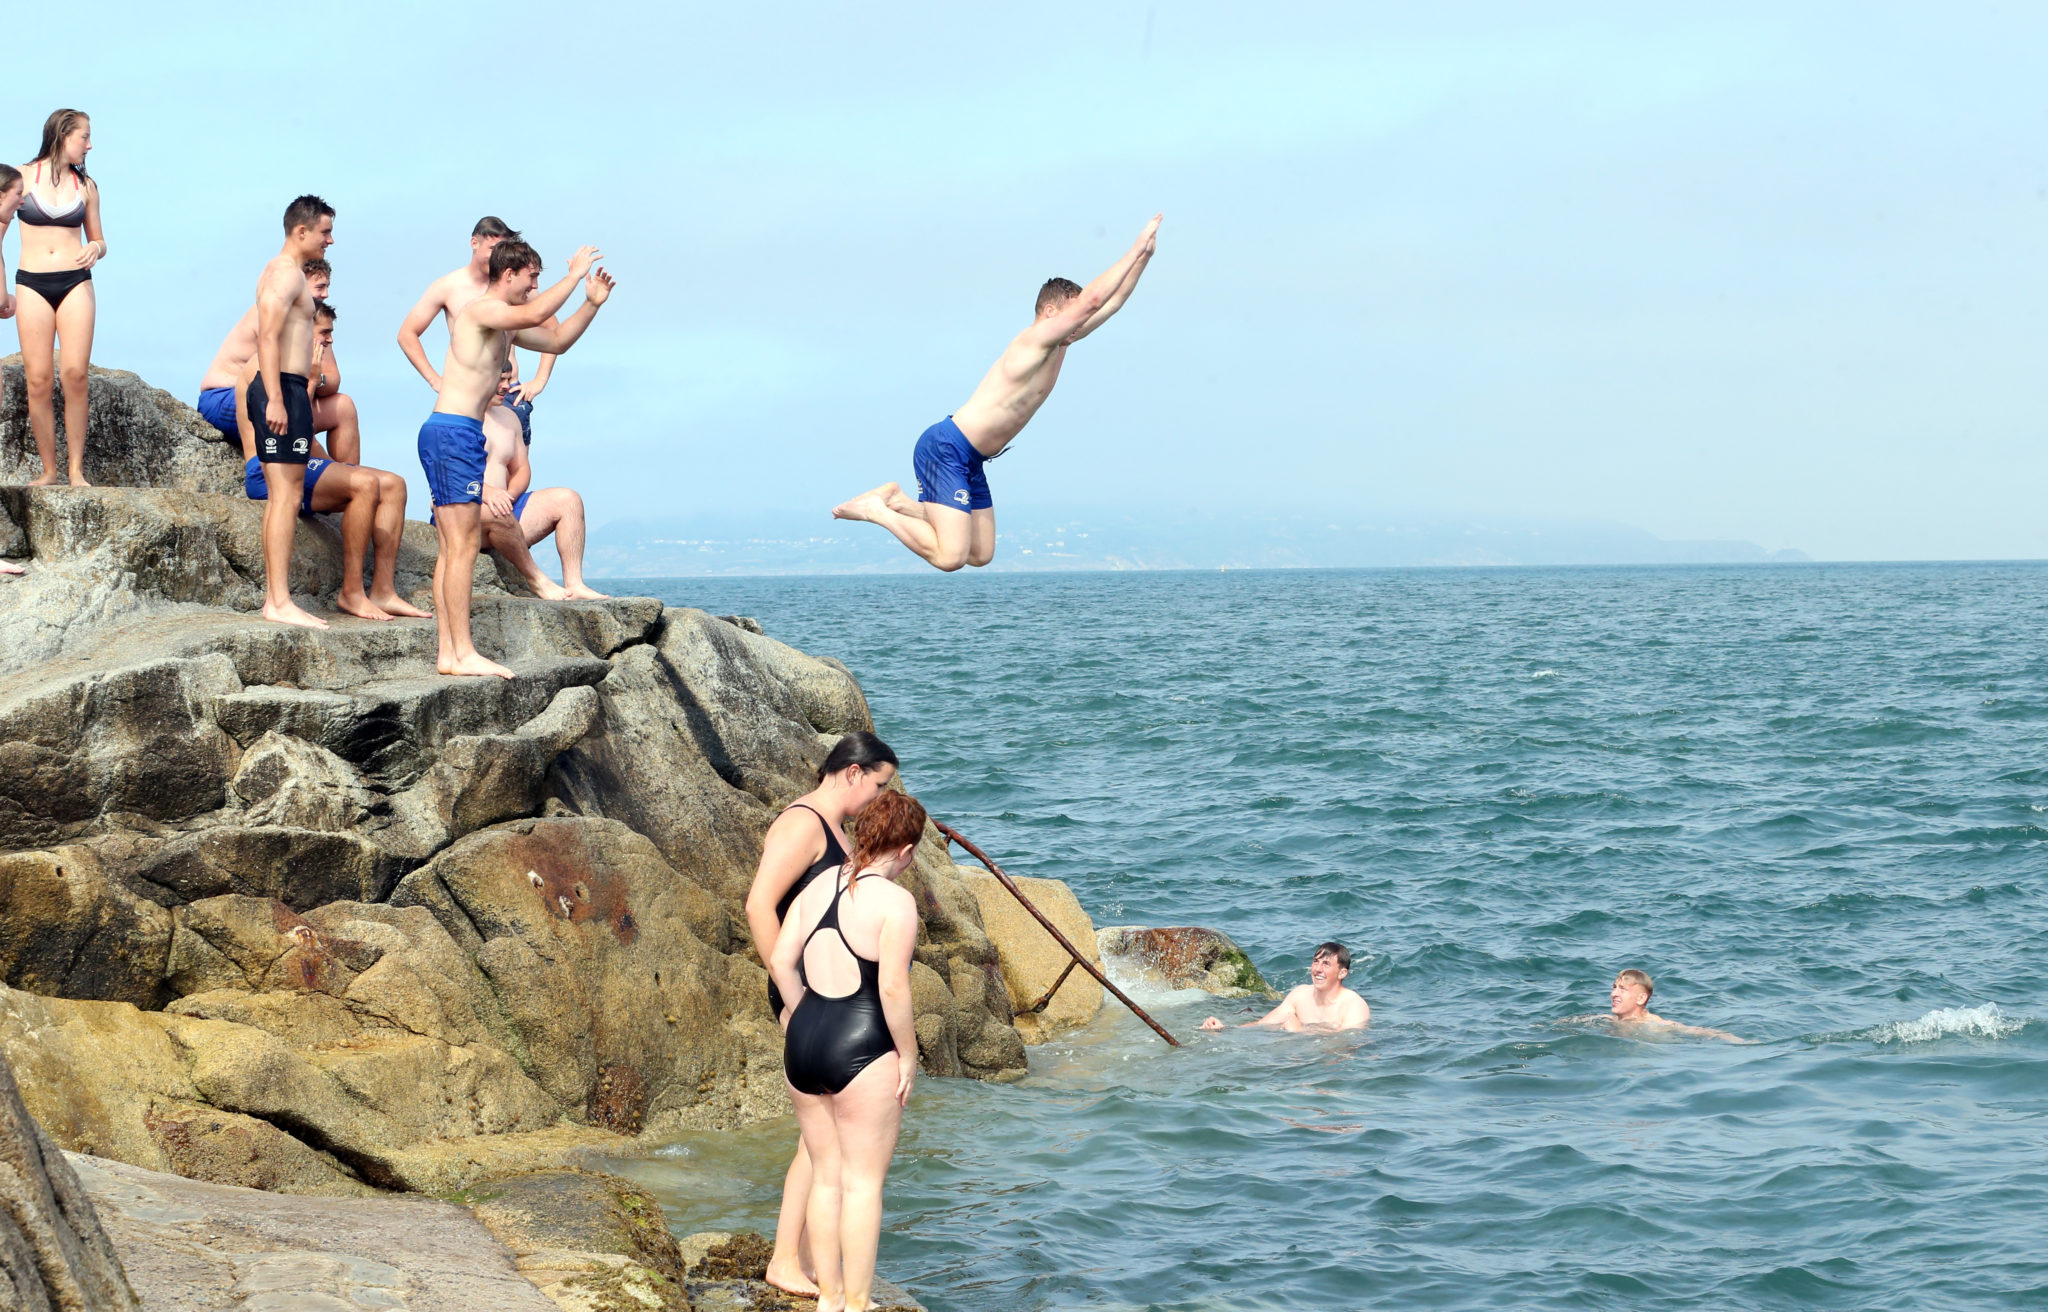 23/08/2021 Covid-19 Pandemic (Coronavirus), Ireland. Day 516 since start of lockdown. Day 106 of eased restrictions. People enjoy jumping in and swimming at the Forty Foot in Dublin as the warmer weather comes back. Photo: Sasko Lazarov/RollingNews.ie